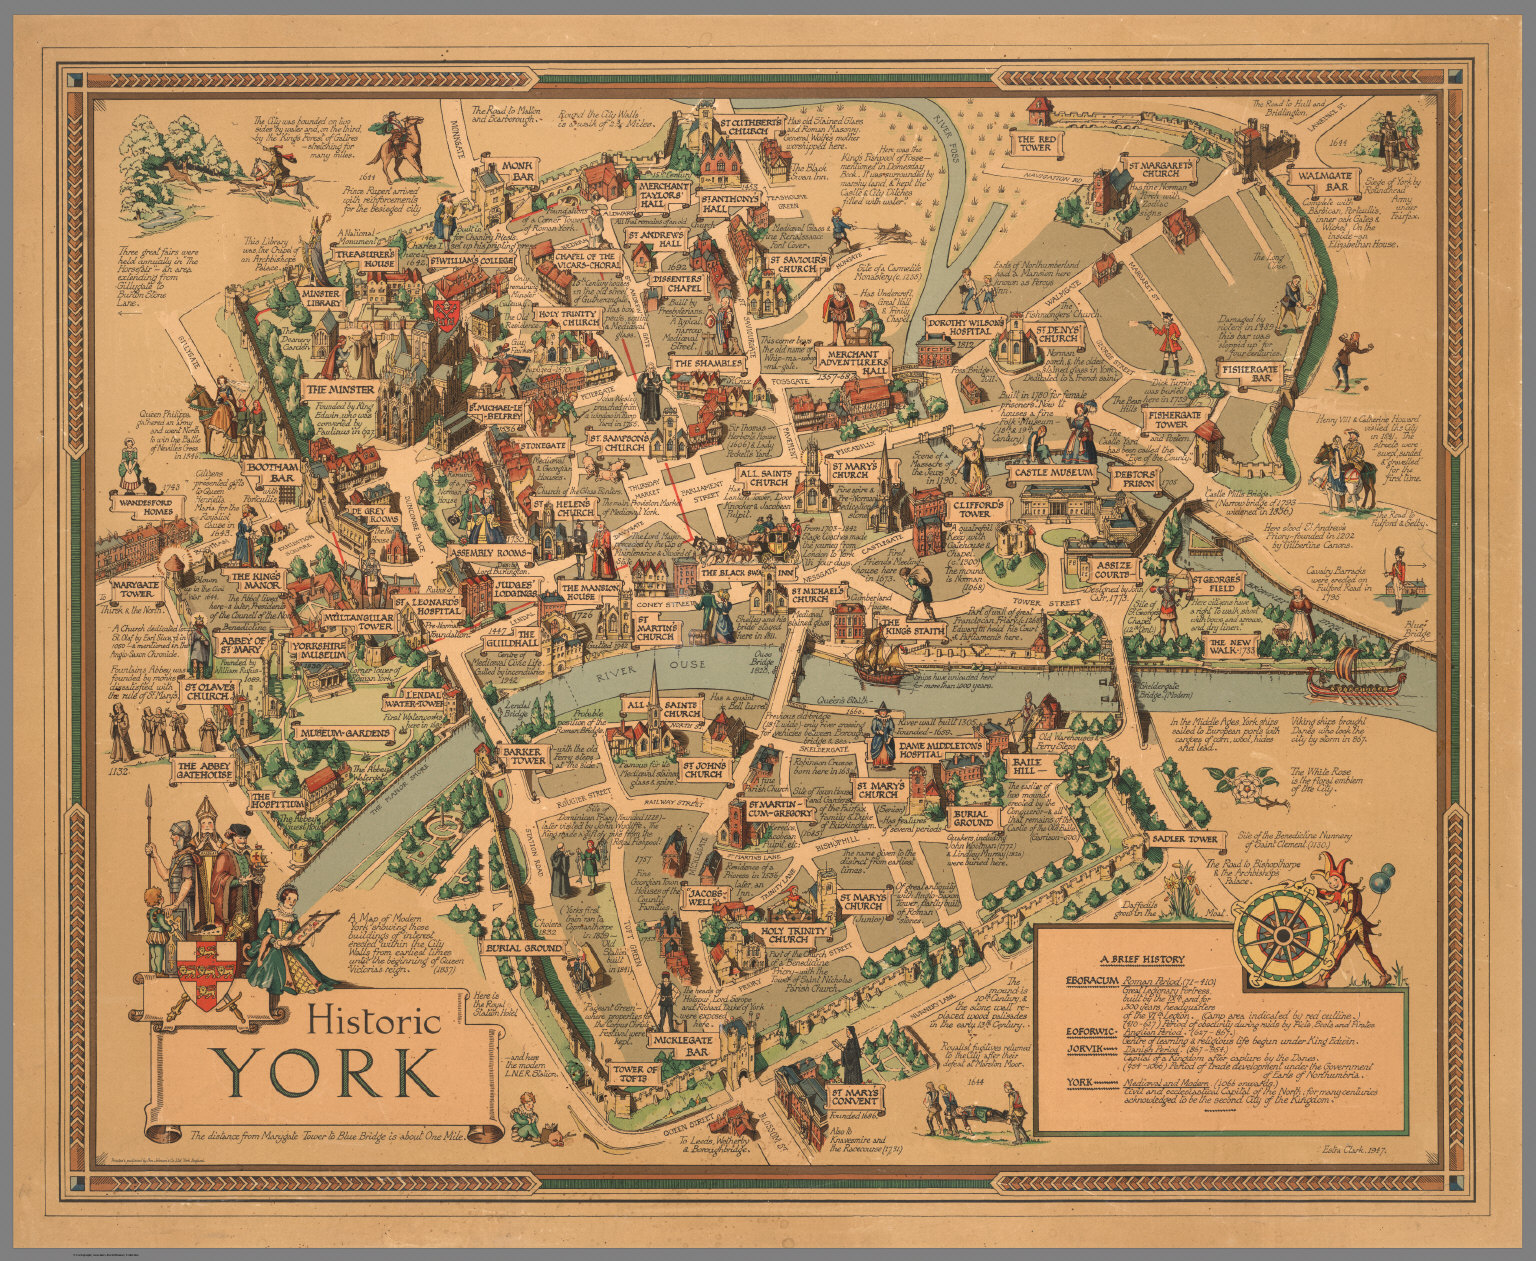 Old Maps Of York Historic York. - David Rumsey Historical Map Collection